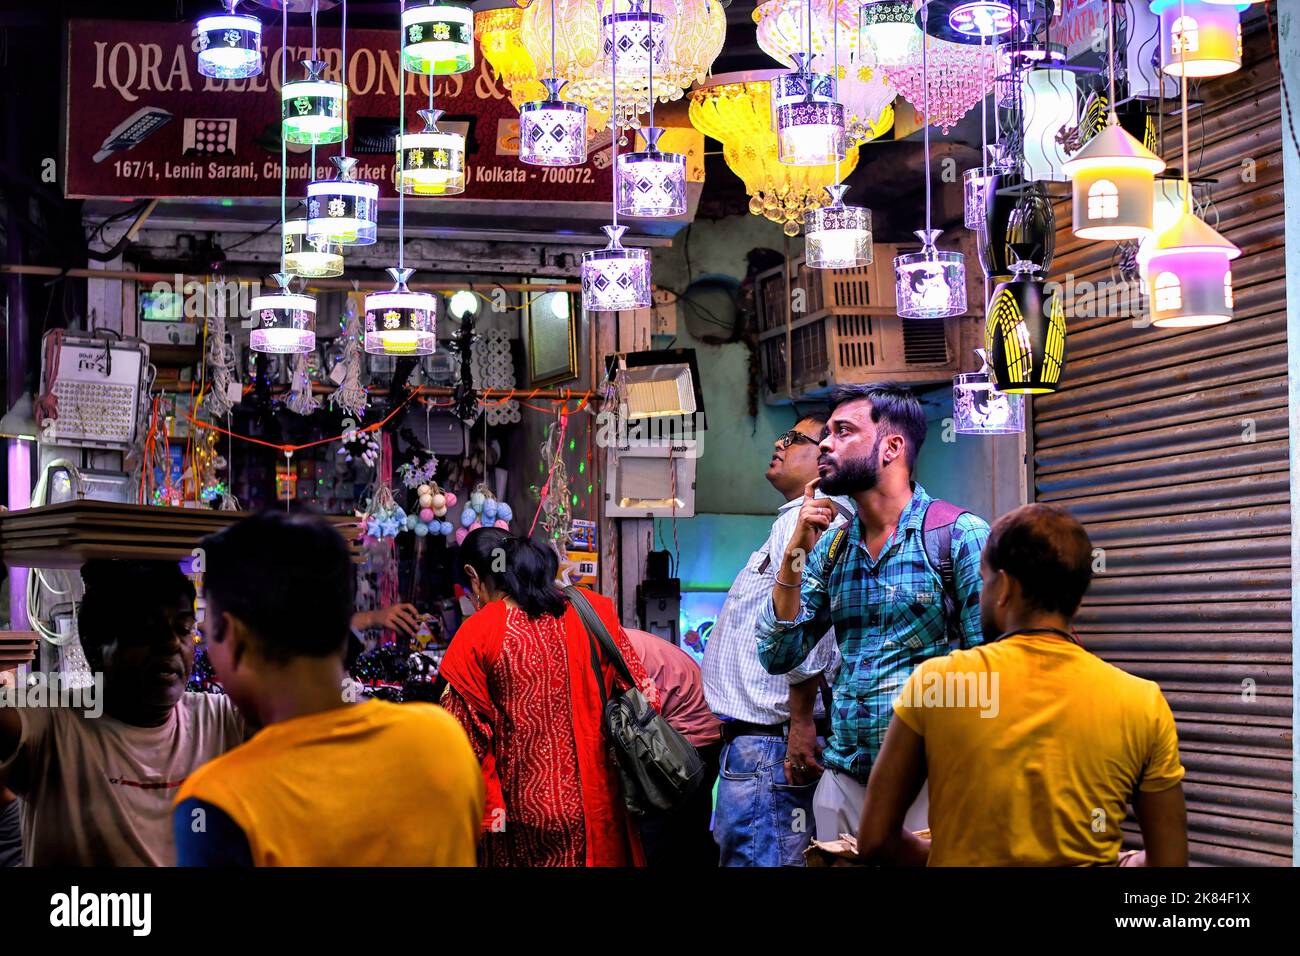 Kolkata, India. 20th Oct, 2022. Customers look at lanterns and Diwali decorations on display at a shop. Diwali is the biggest Indian festival of lights, usually lasting five days starting from 24th October this year. Diwali is celebrated to spiritually signify the victory of light over darkness, good over evil. Furthermore, it is a celebration of the day Rama returned to his kingdom in Ayodhya with his wife Sita and his brother Lakshmana after defeating the demon Ravana in Lanka and serving 14 years of exile as per Hindu mythology. Credit: SOPA Images Limited/Alamy Live News Stock Photo